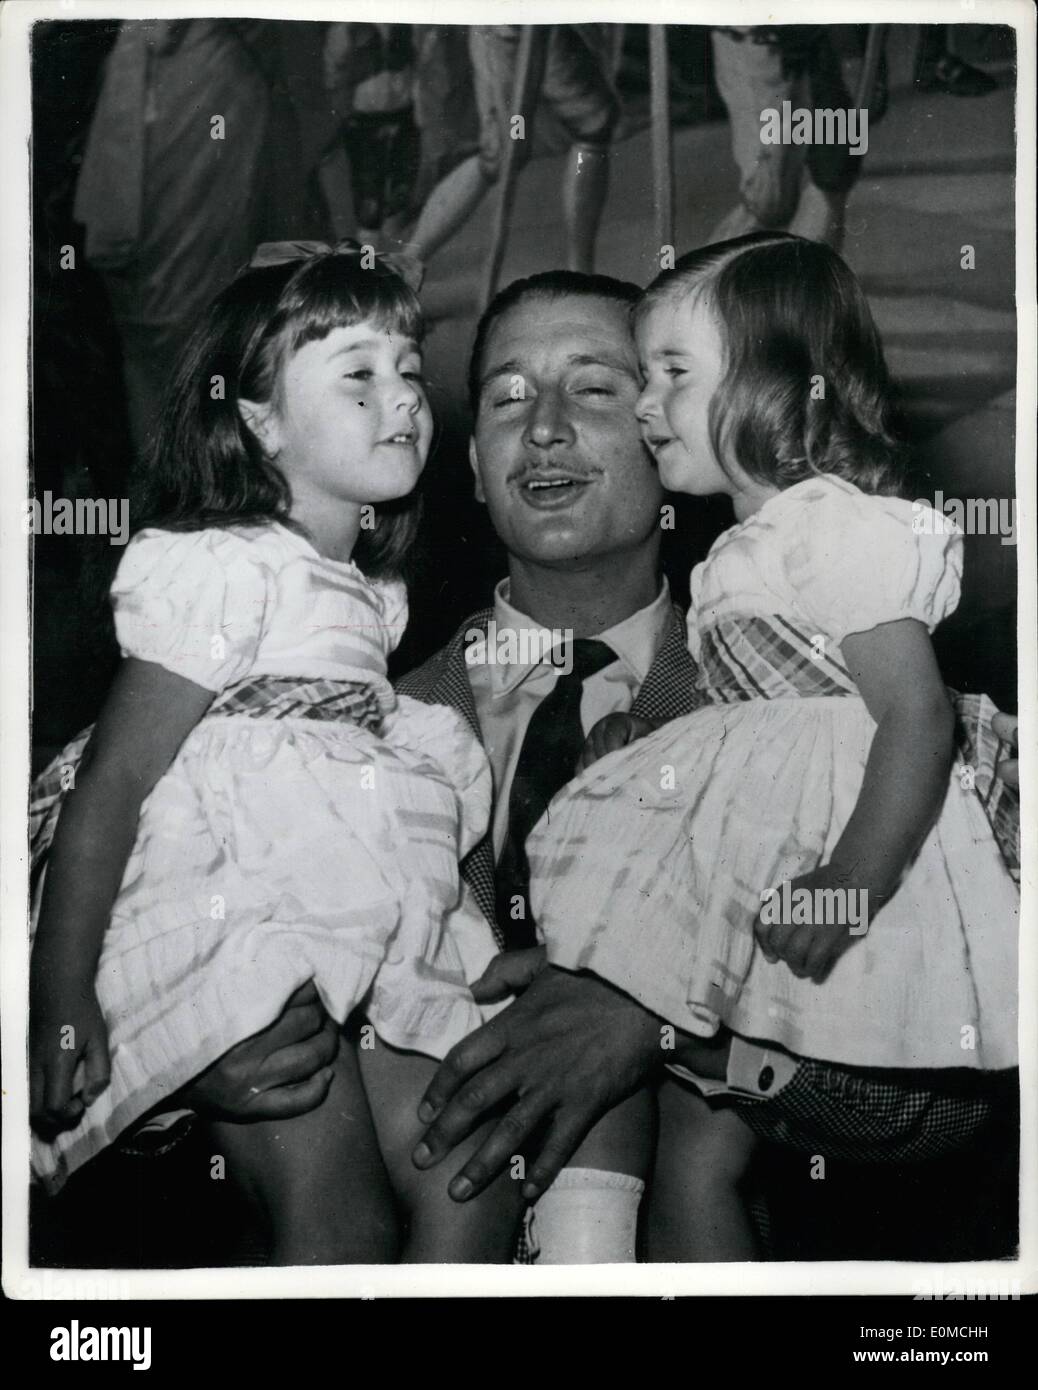 Sep. 27, 1954 - 27-9-54 The granddaughters of General Franco greet their father. The Marquis of Villaverde, son-in-law to General Franco, the dictator of Spain, was greeted by his two daughters when he returned to Madrid recently after a stay in the United States where he was studying surgery. Keystone Photo Shows: The Marquis of Villaverde is greeted by his two daughters, Mariz Del Carmen (left) and Marie de la O on his arrival to Madrid. Stock Photo